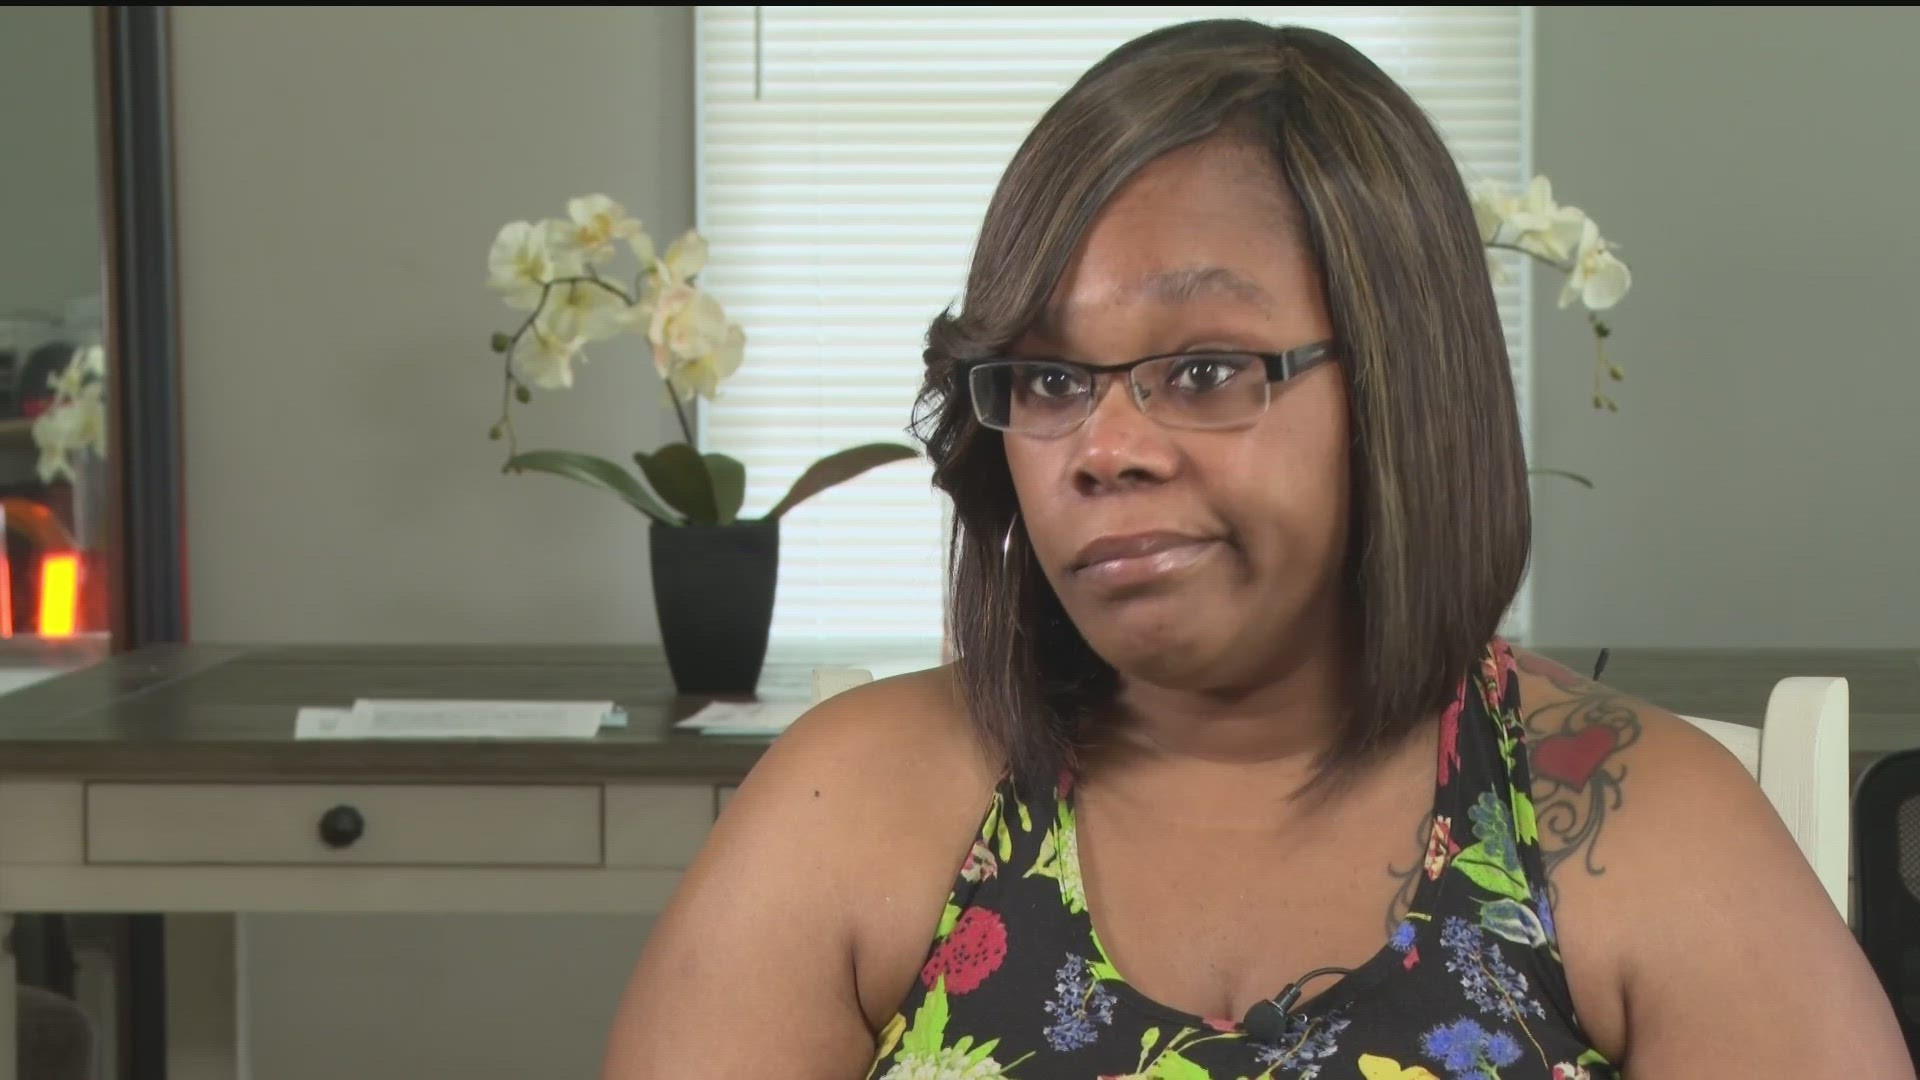 Debra Johnson moved to Georgia with her six kids, fleeing a domestic violence situation. She has a master's degree but has had a hard time finding a job.